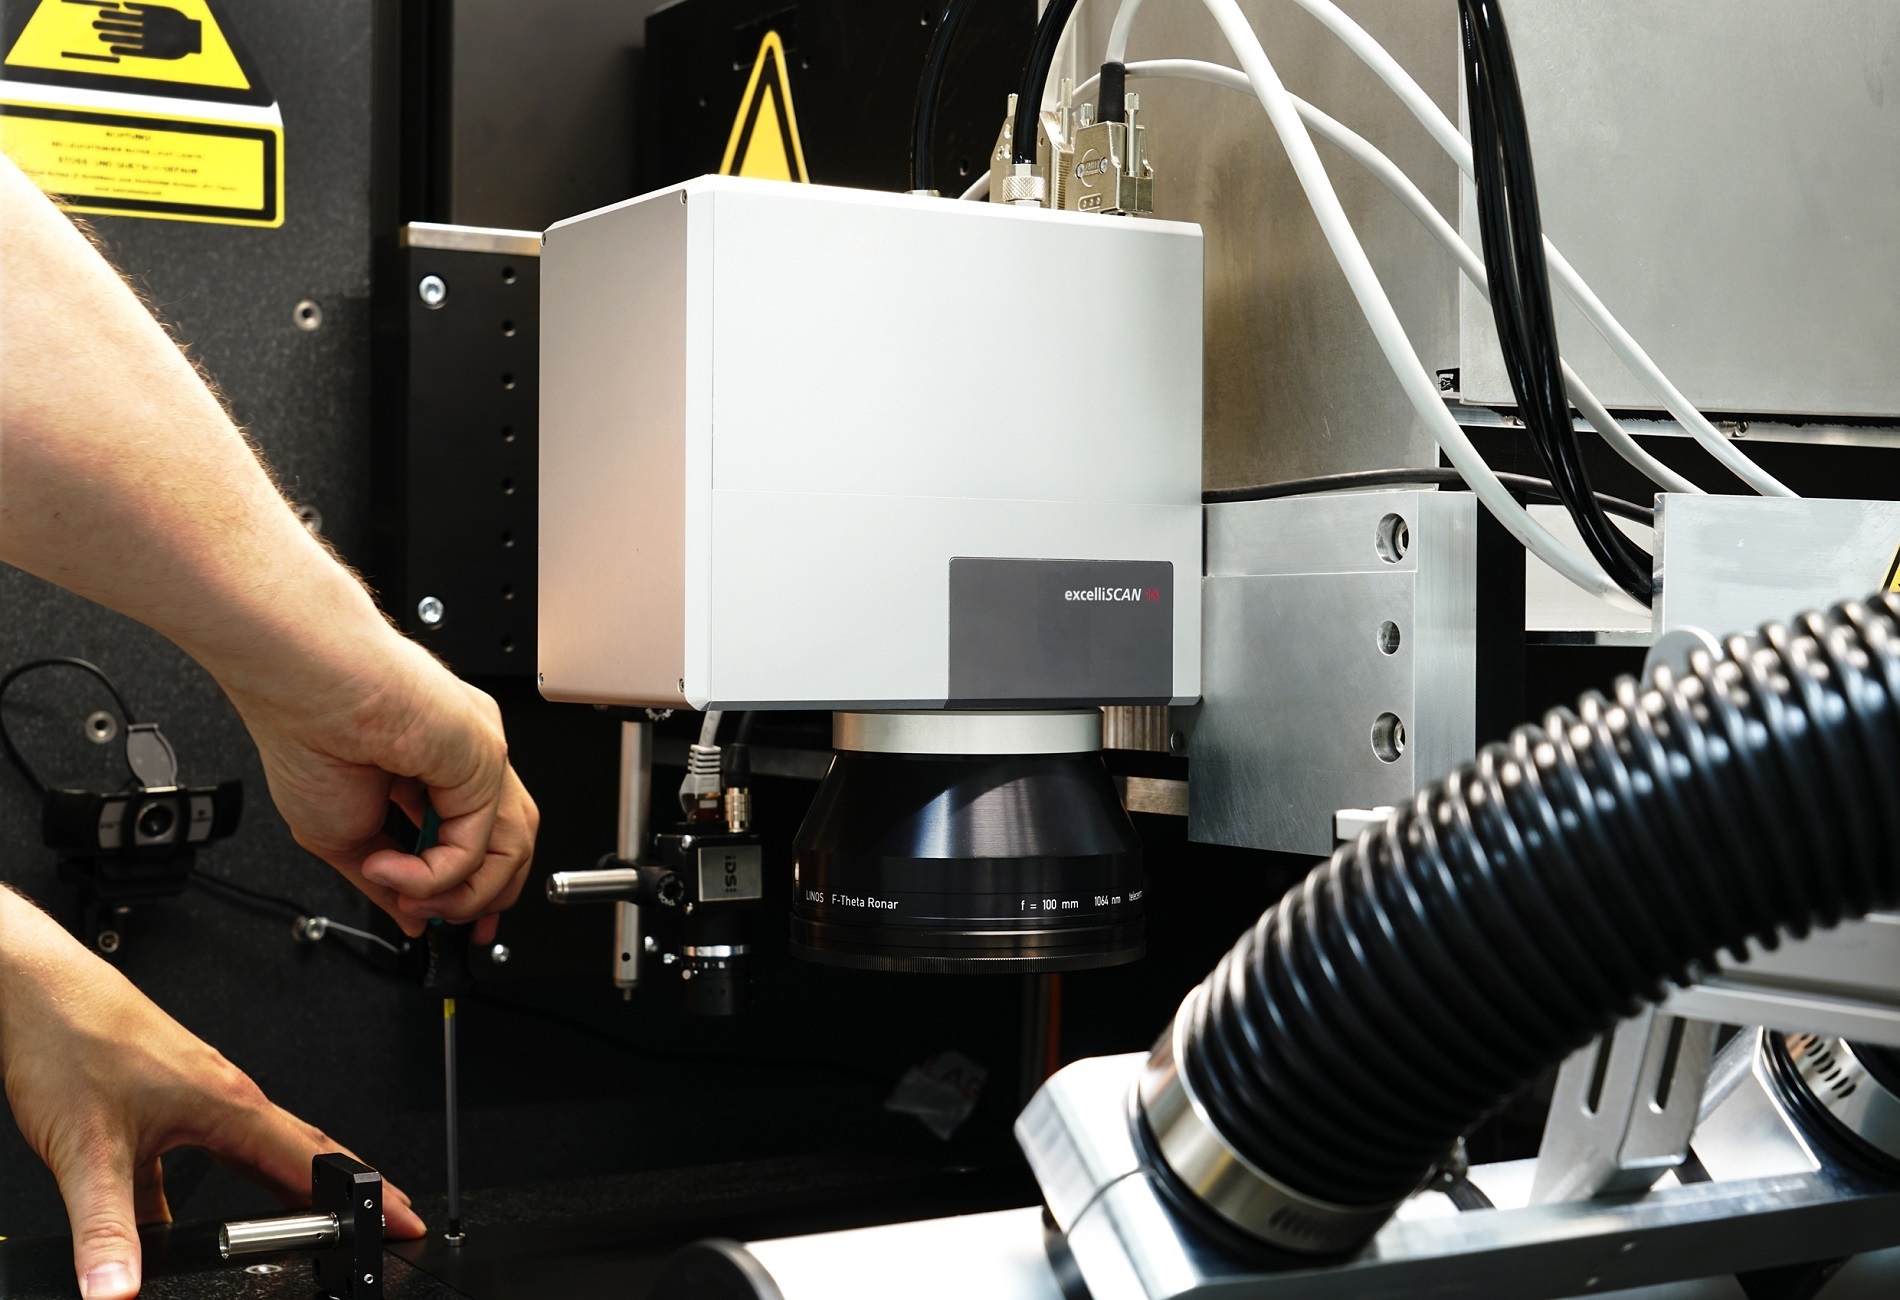 The excelliSCAN scan head is perfectly suited for laser micro-machining and additive manufacturing